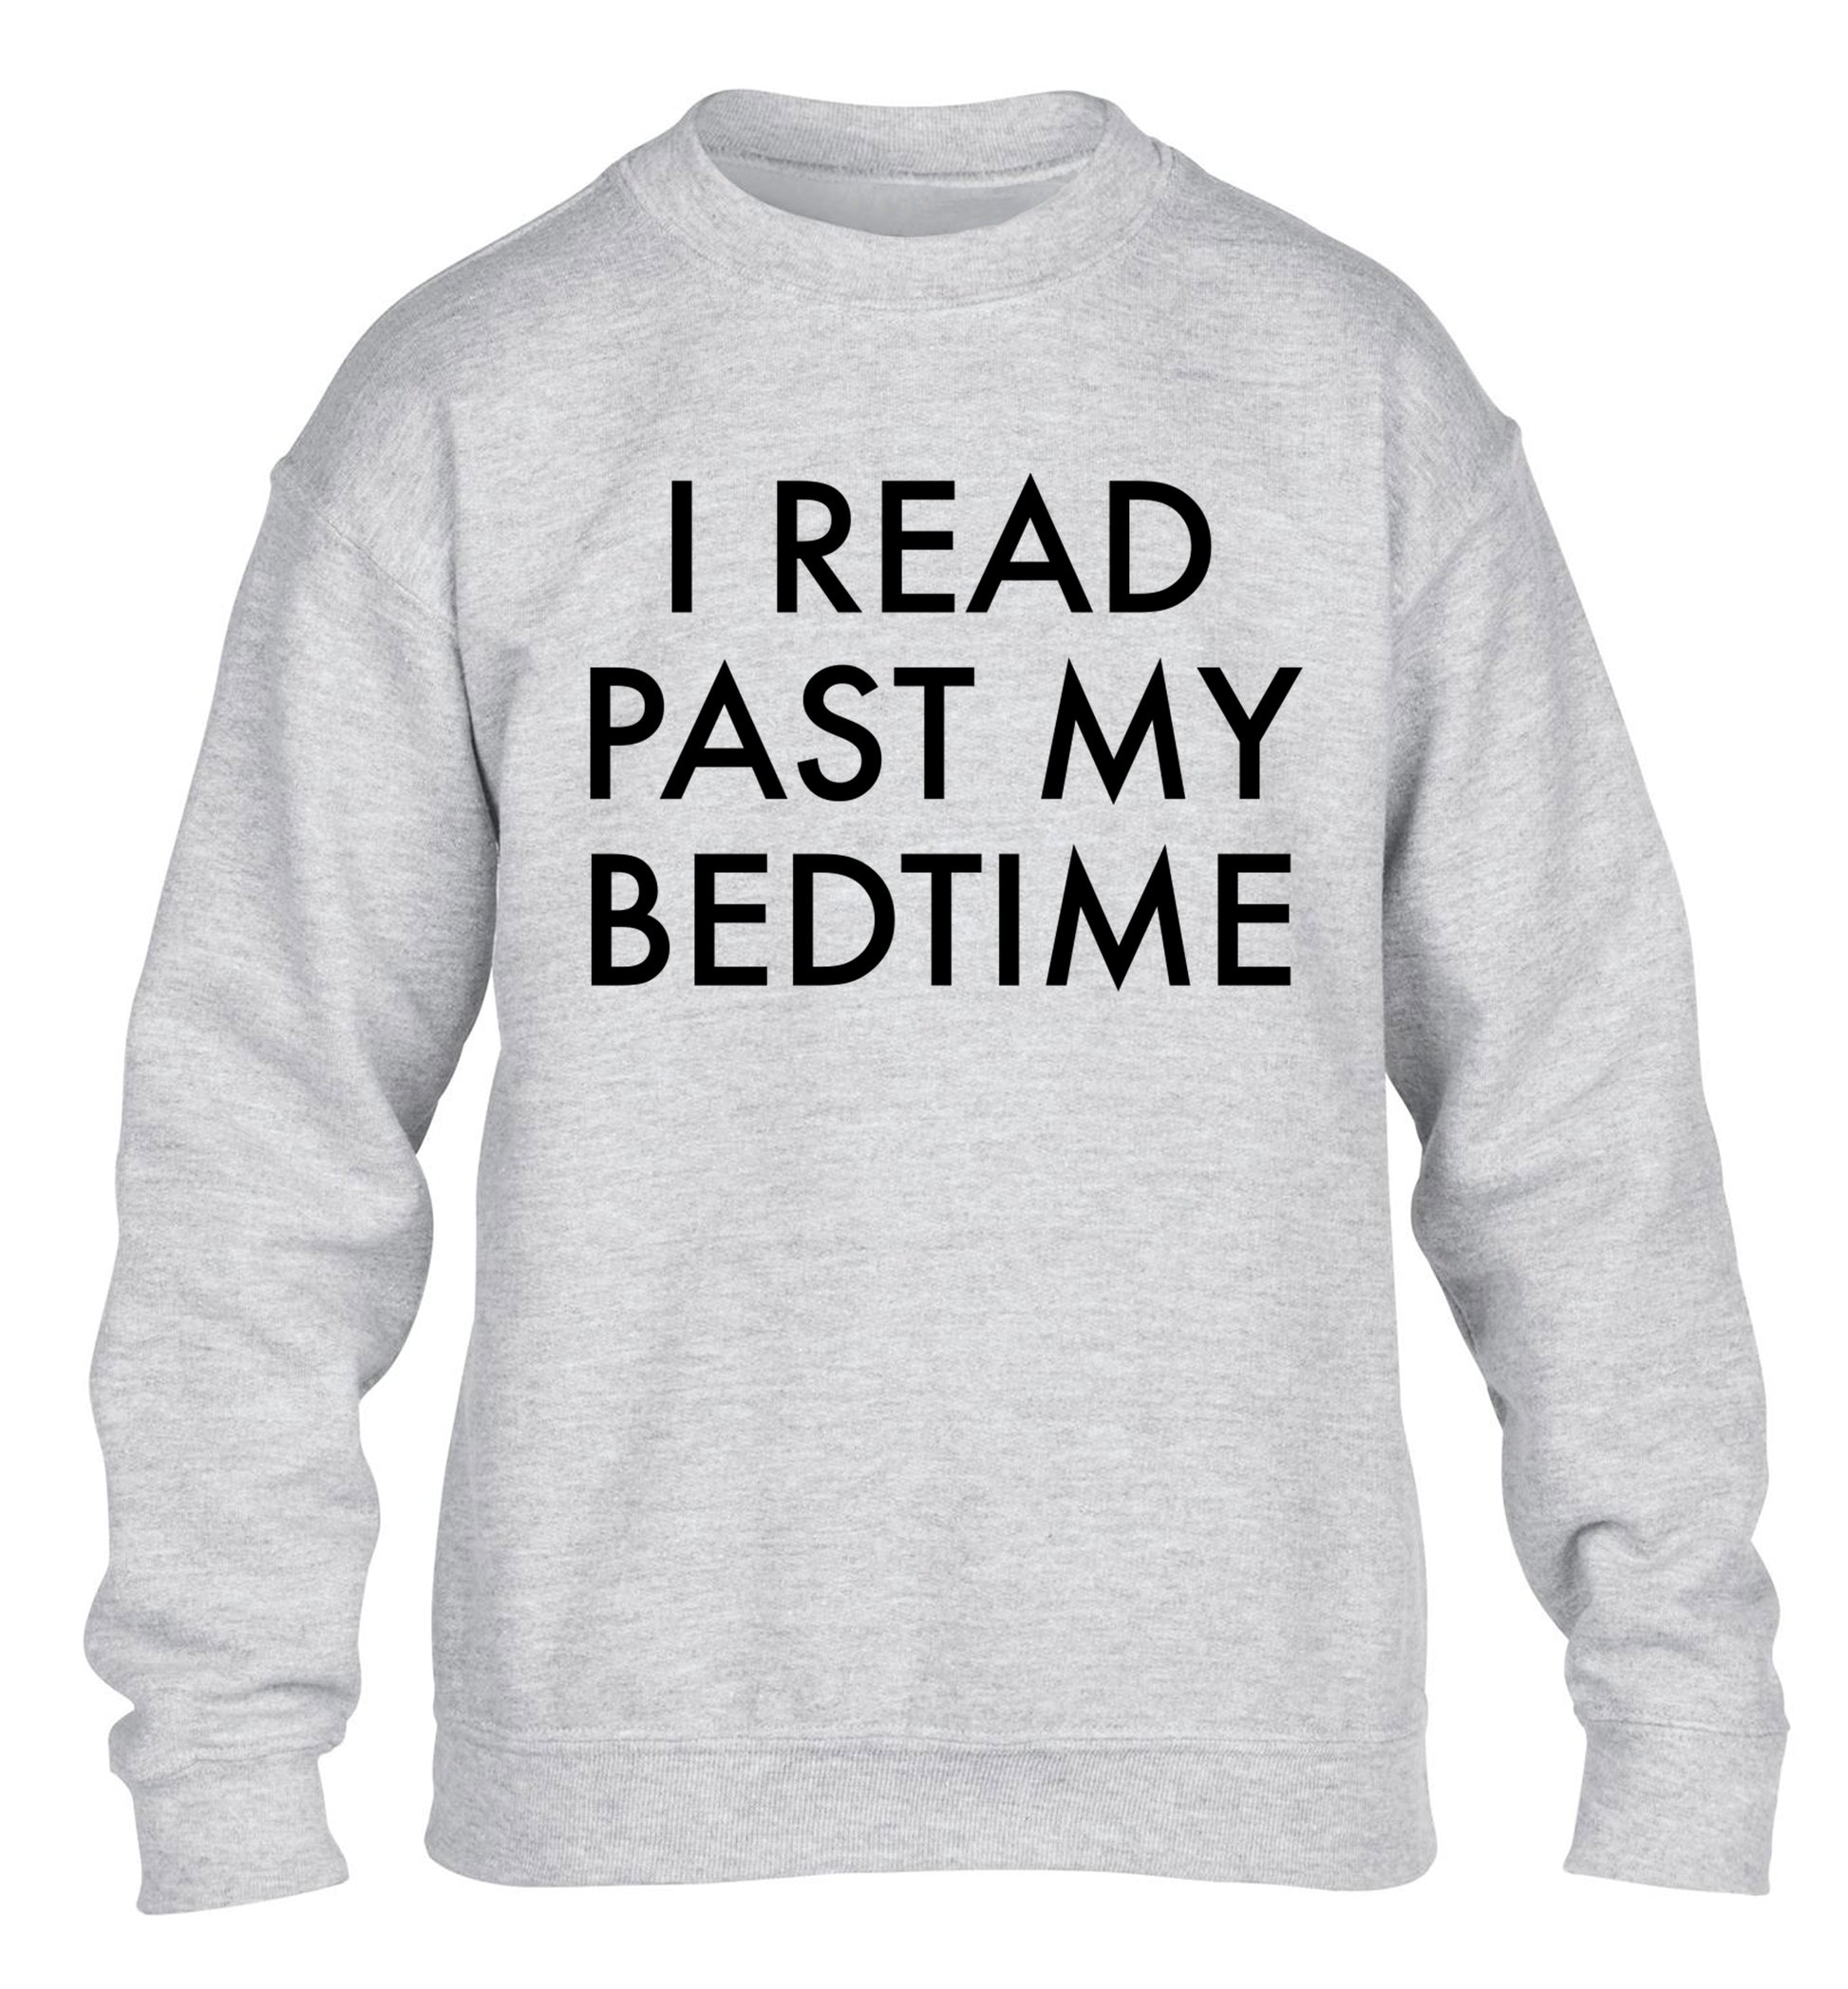 I read past my bedtime children's grey sweater 12-14 Years